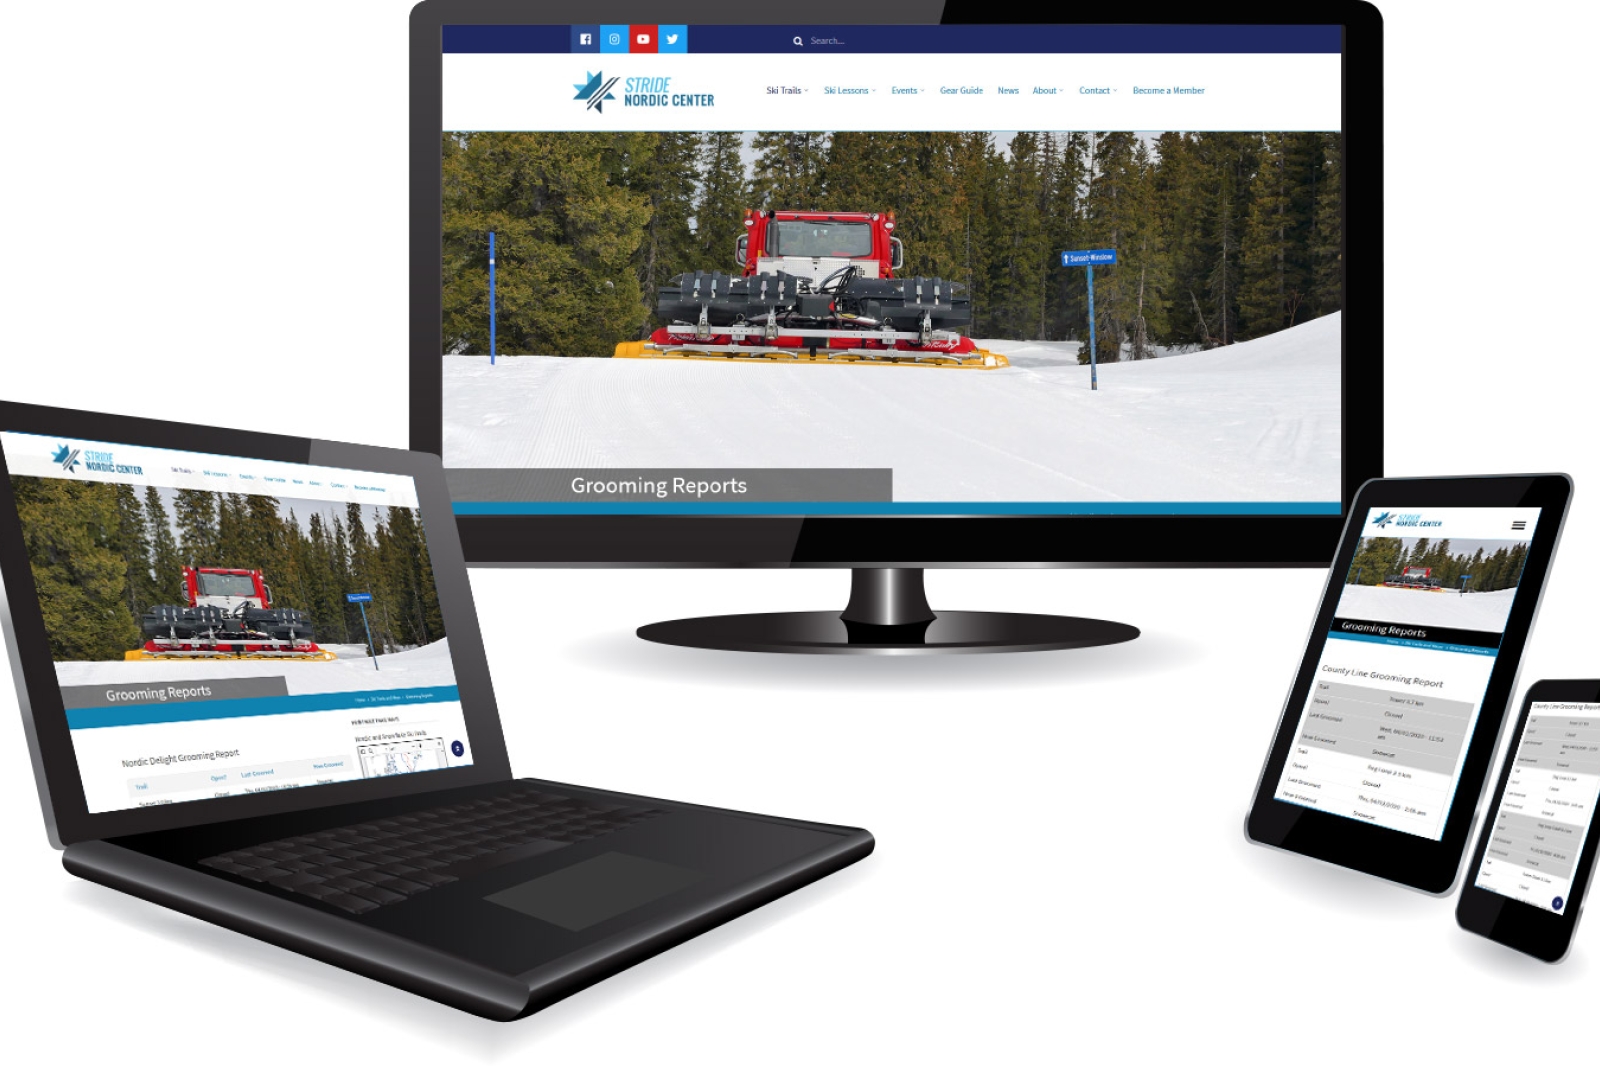 The Nordic Center website theme was designed to be fully responsive to various devices and screen sizes.